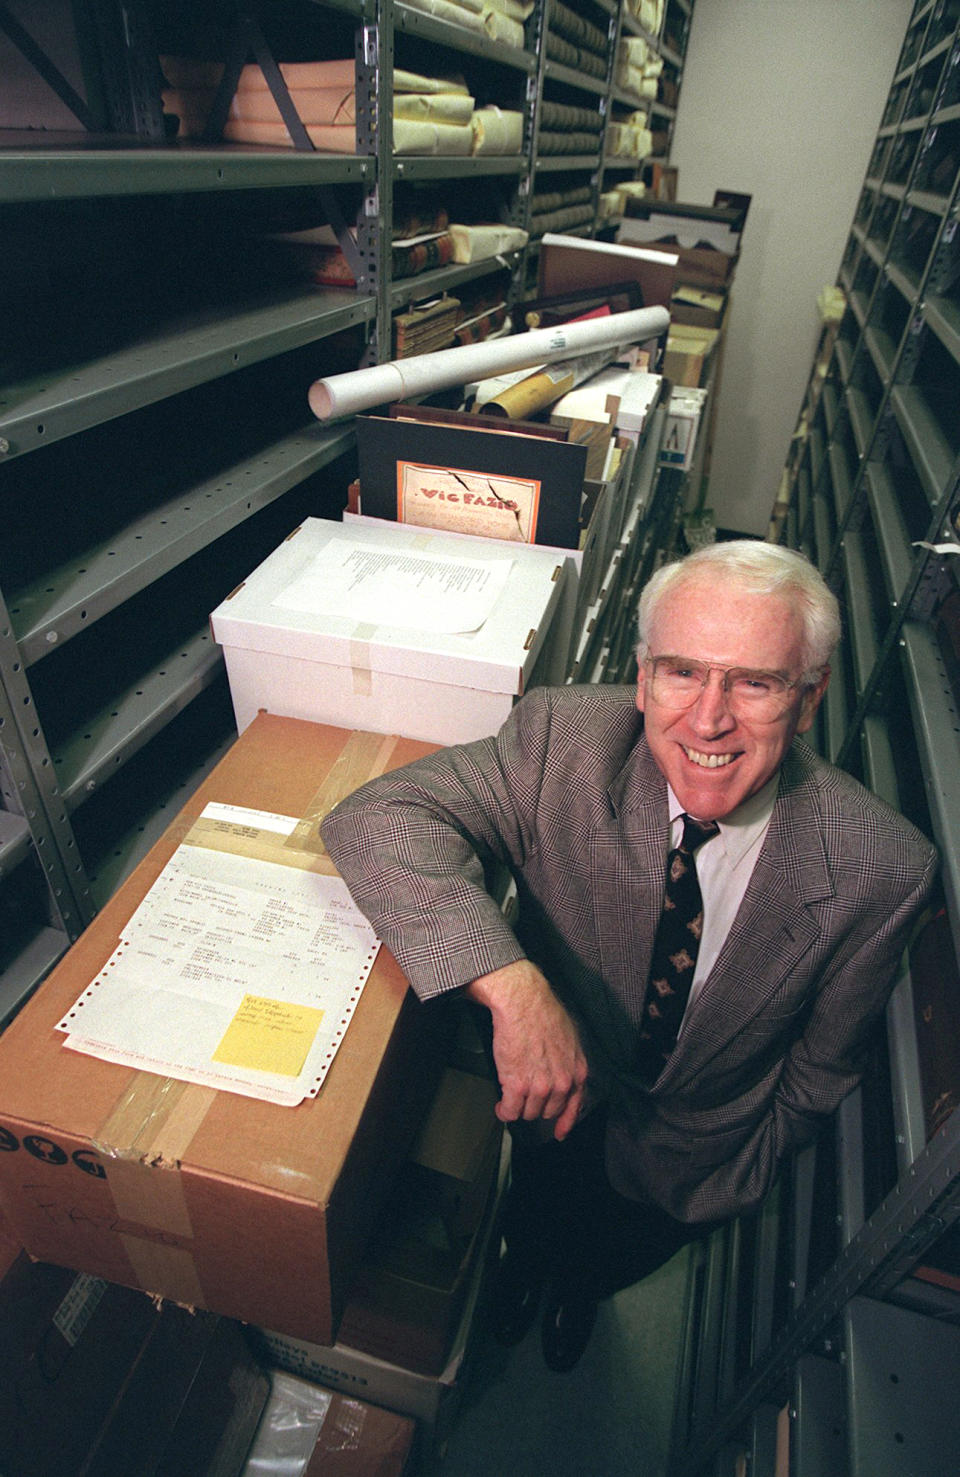 Former U.S. Congressman Vic Fazio stands inside the Shields Library at University of California, Davis, on Feb. 12, 1999, in Davis, Calif., with boxes of his legal papers which he donated to the school. Fazio, a Democratic congressman from California who served for 20 years and rose to become an influential party leader in the House, has died. Fazio's death was announced Wednesday, March 26, 2022, by House Speaker Nancy Pelosi, although her office didn't provide details. He was 79. (Randy Pench/The Sacramento Bee via AP)